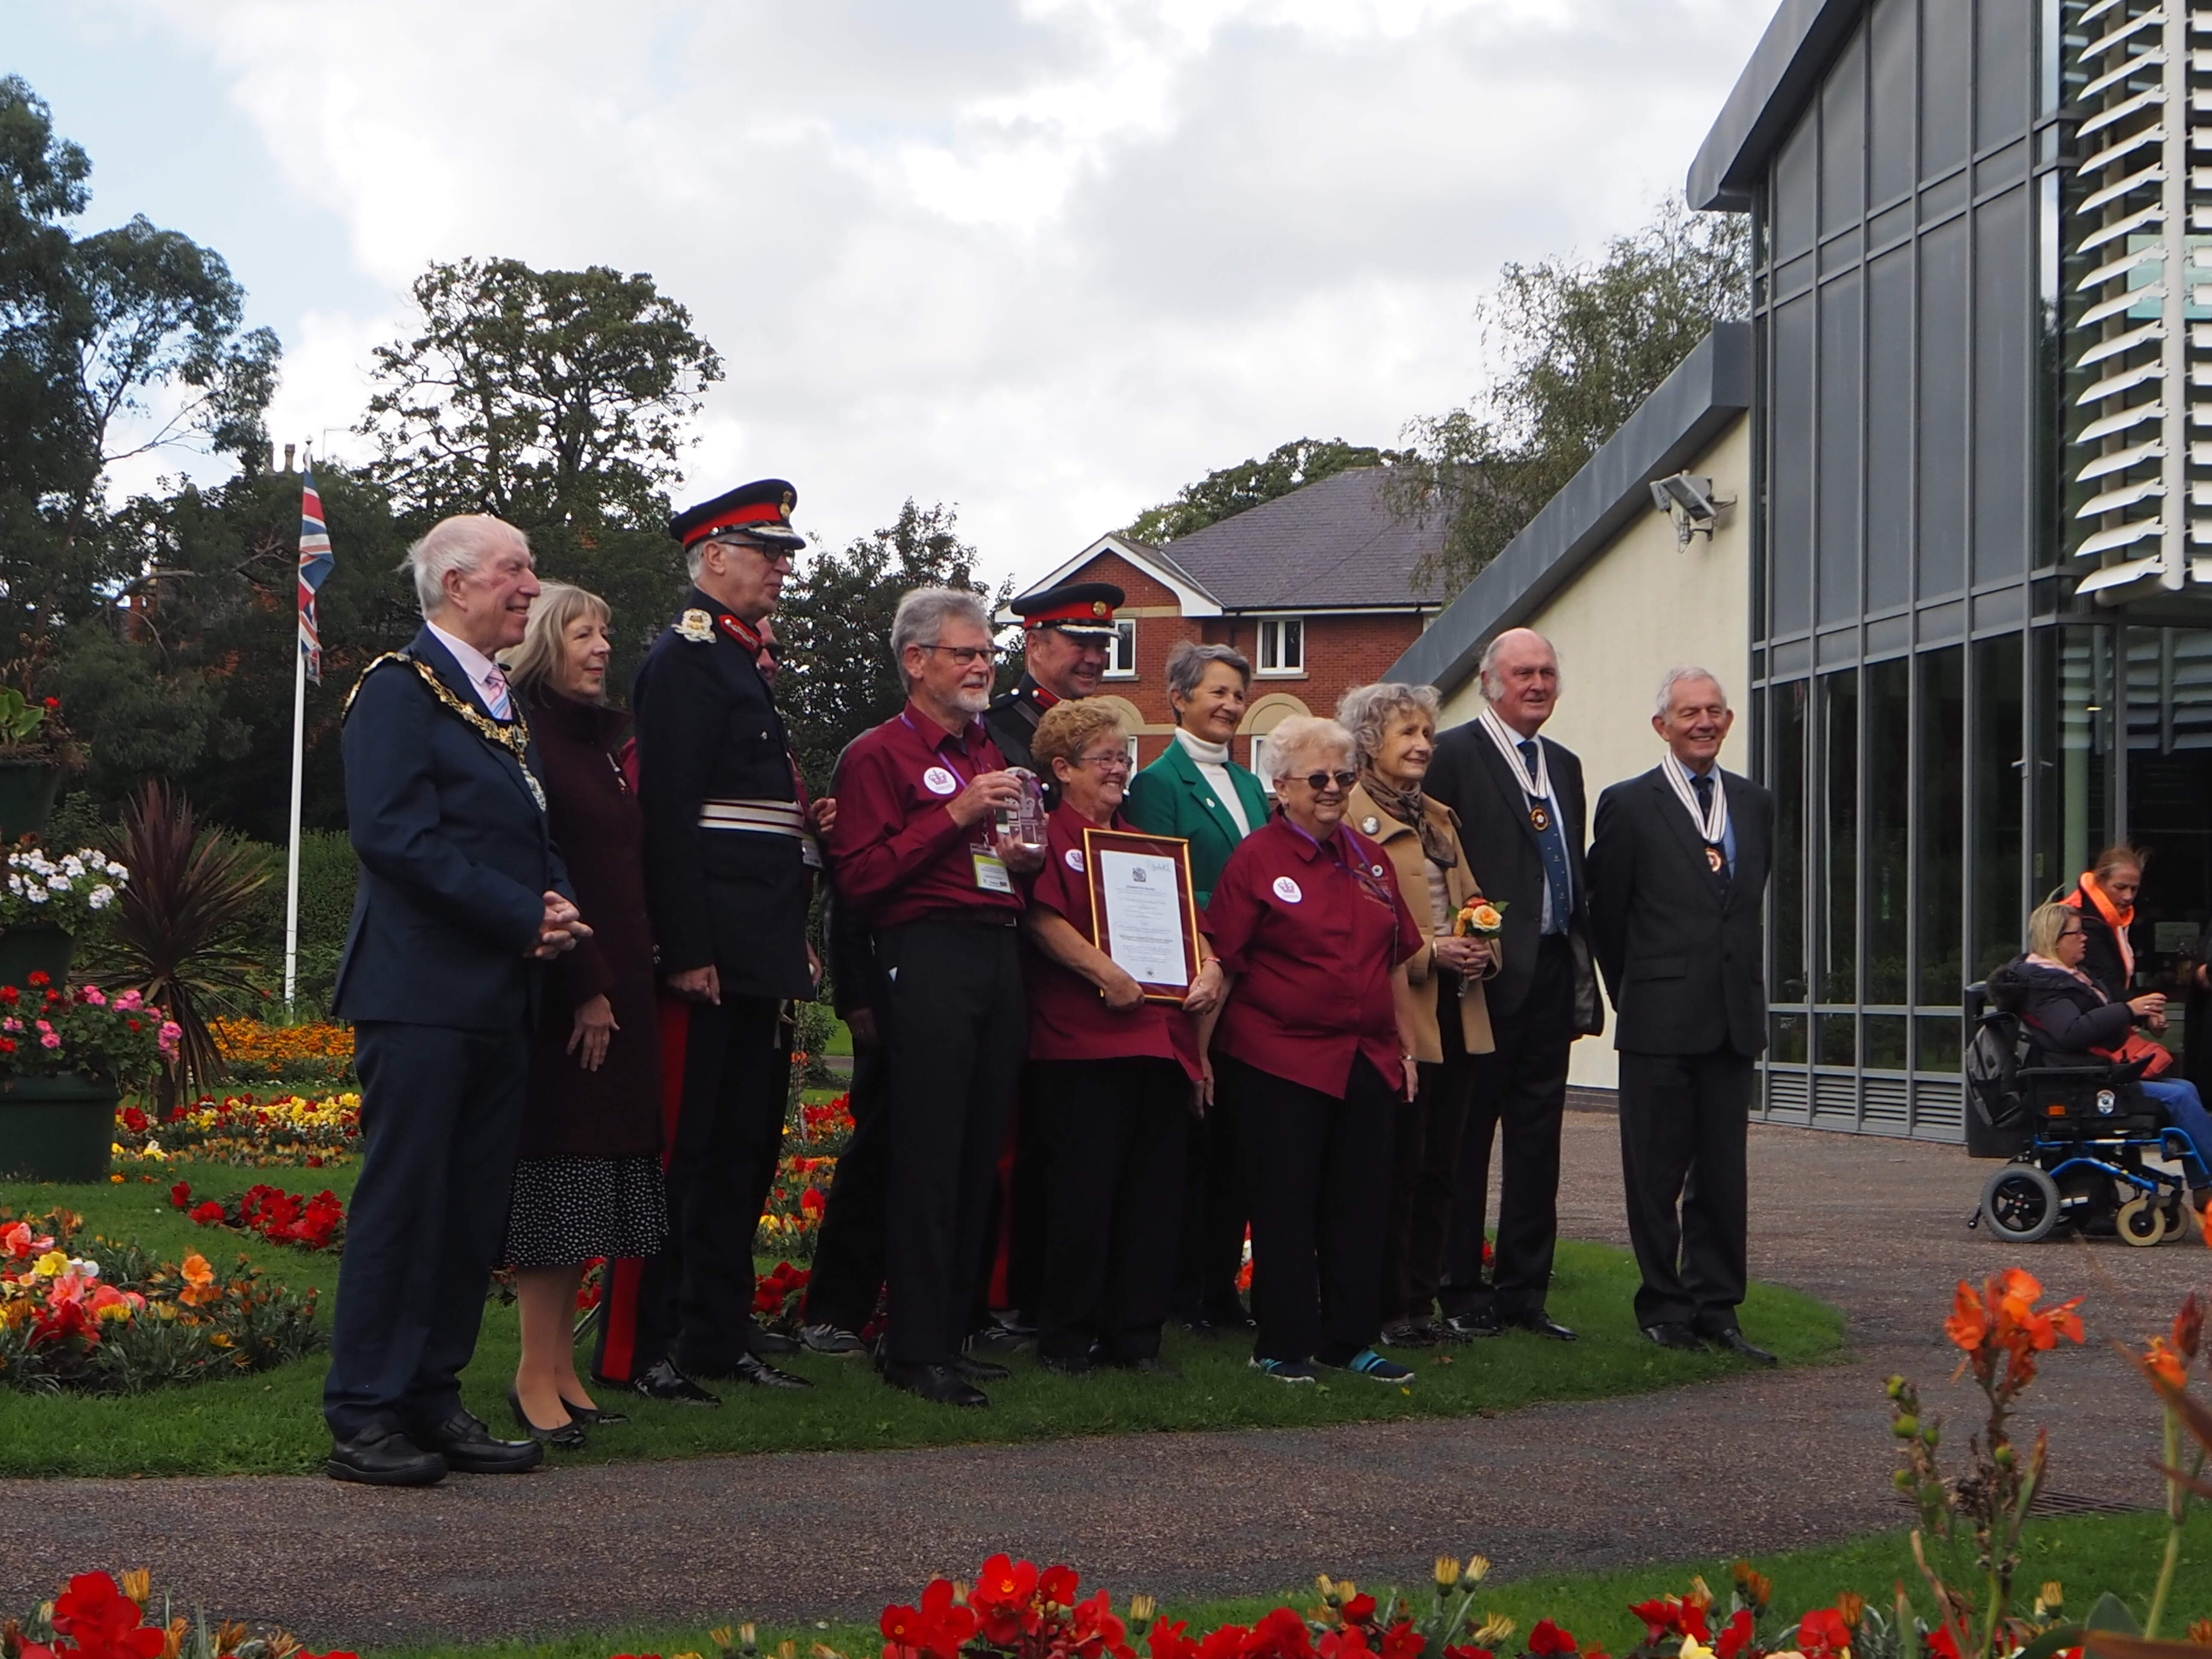 The Lord-Lieutenant of Merseyside presents the Queen’s Award for Voluntary Service  to the Friends of Birkenhead Park